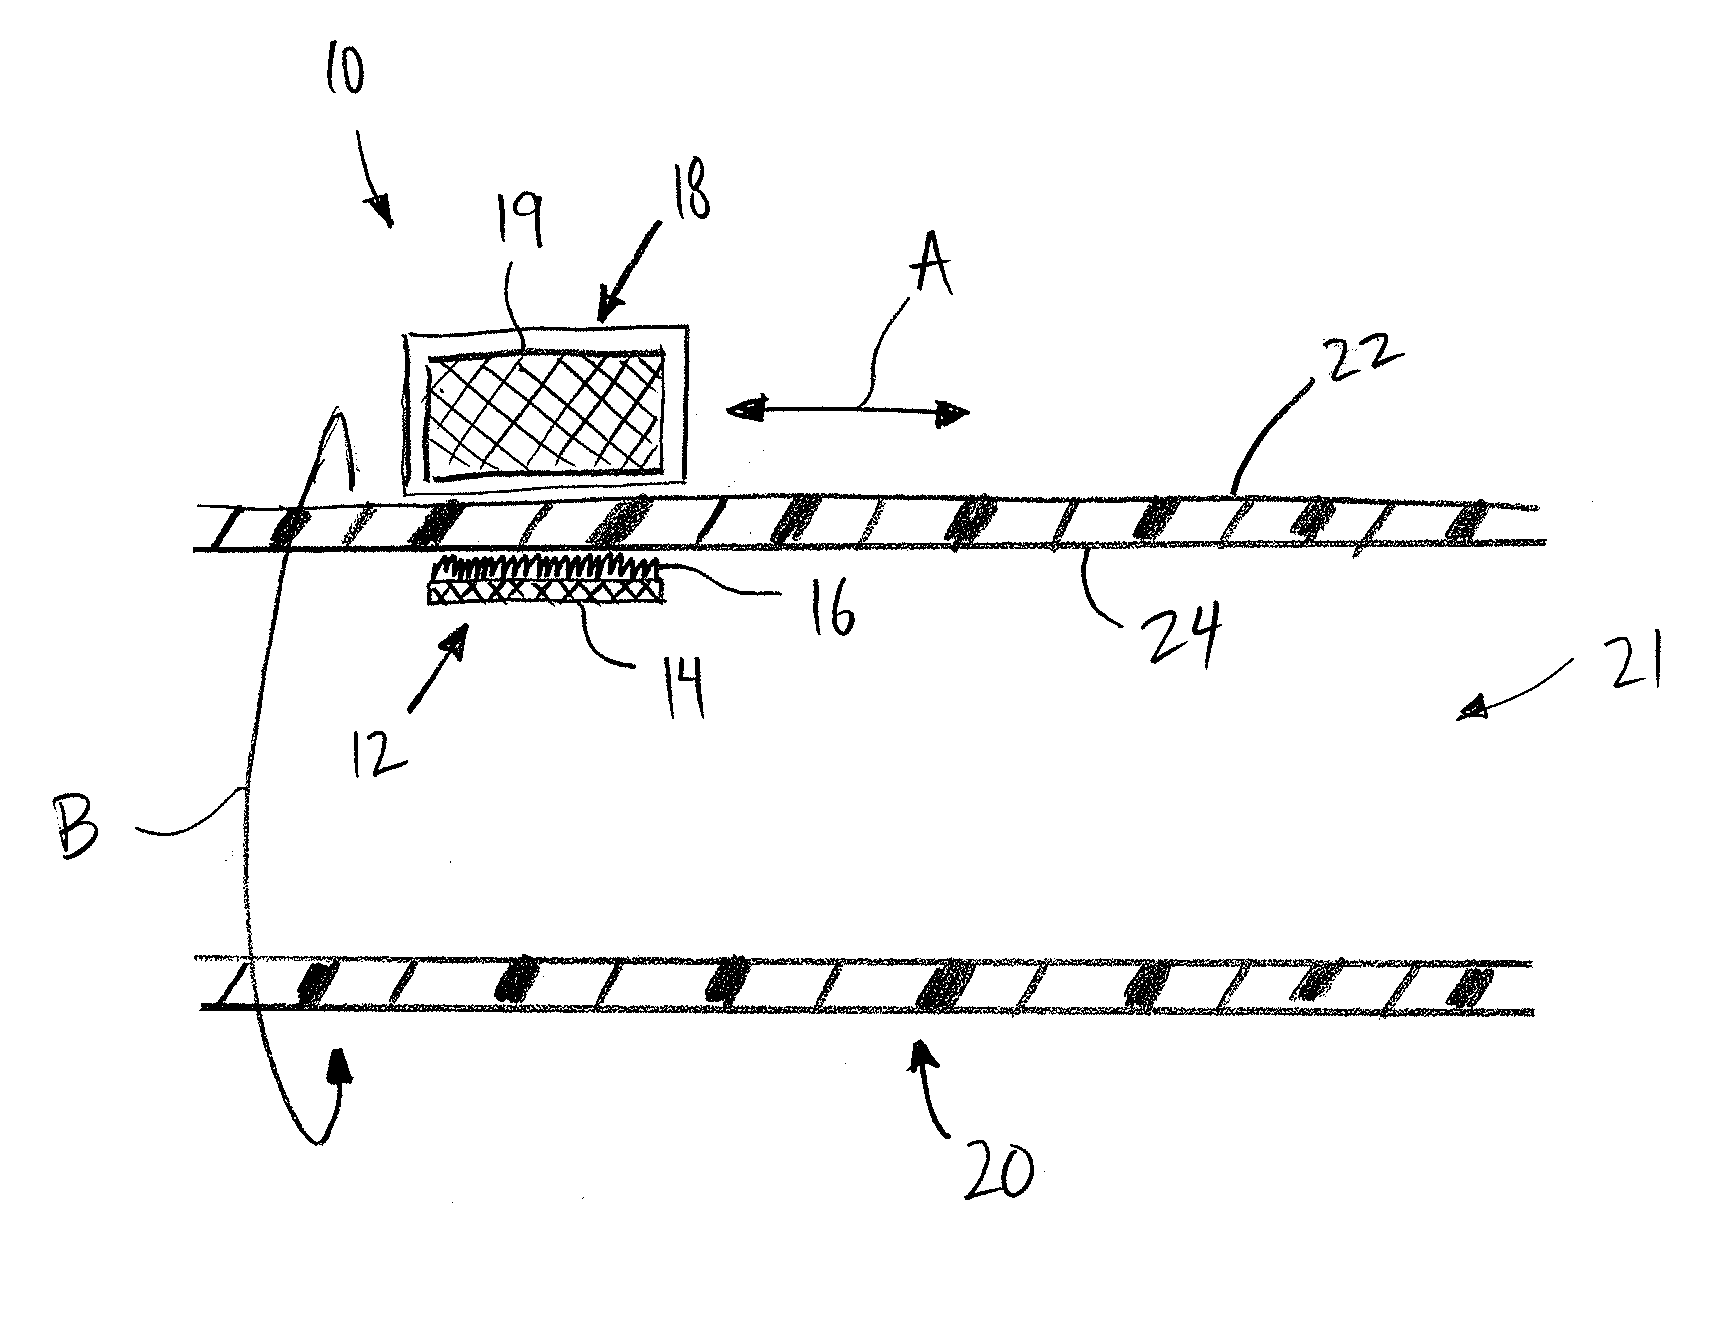 Magnetic device and method of using such device to clean the inner surface of a tube, and methods and devices for siphoning fluid